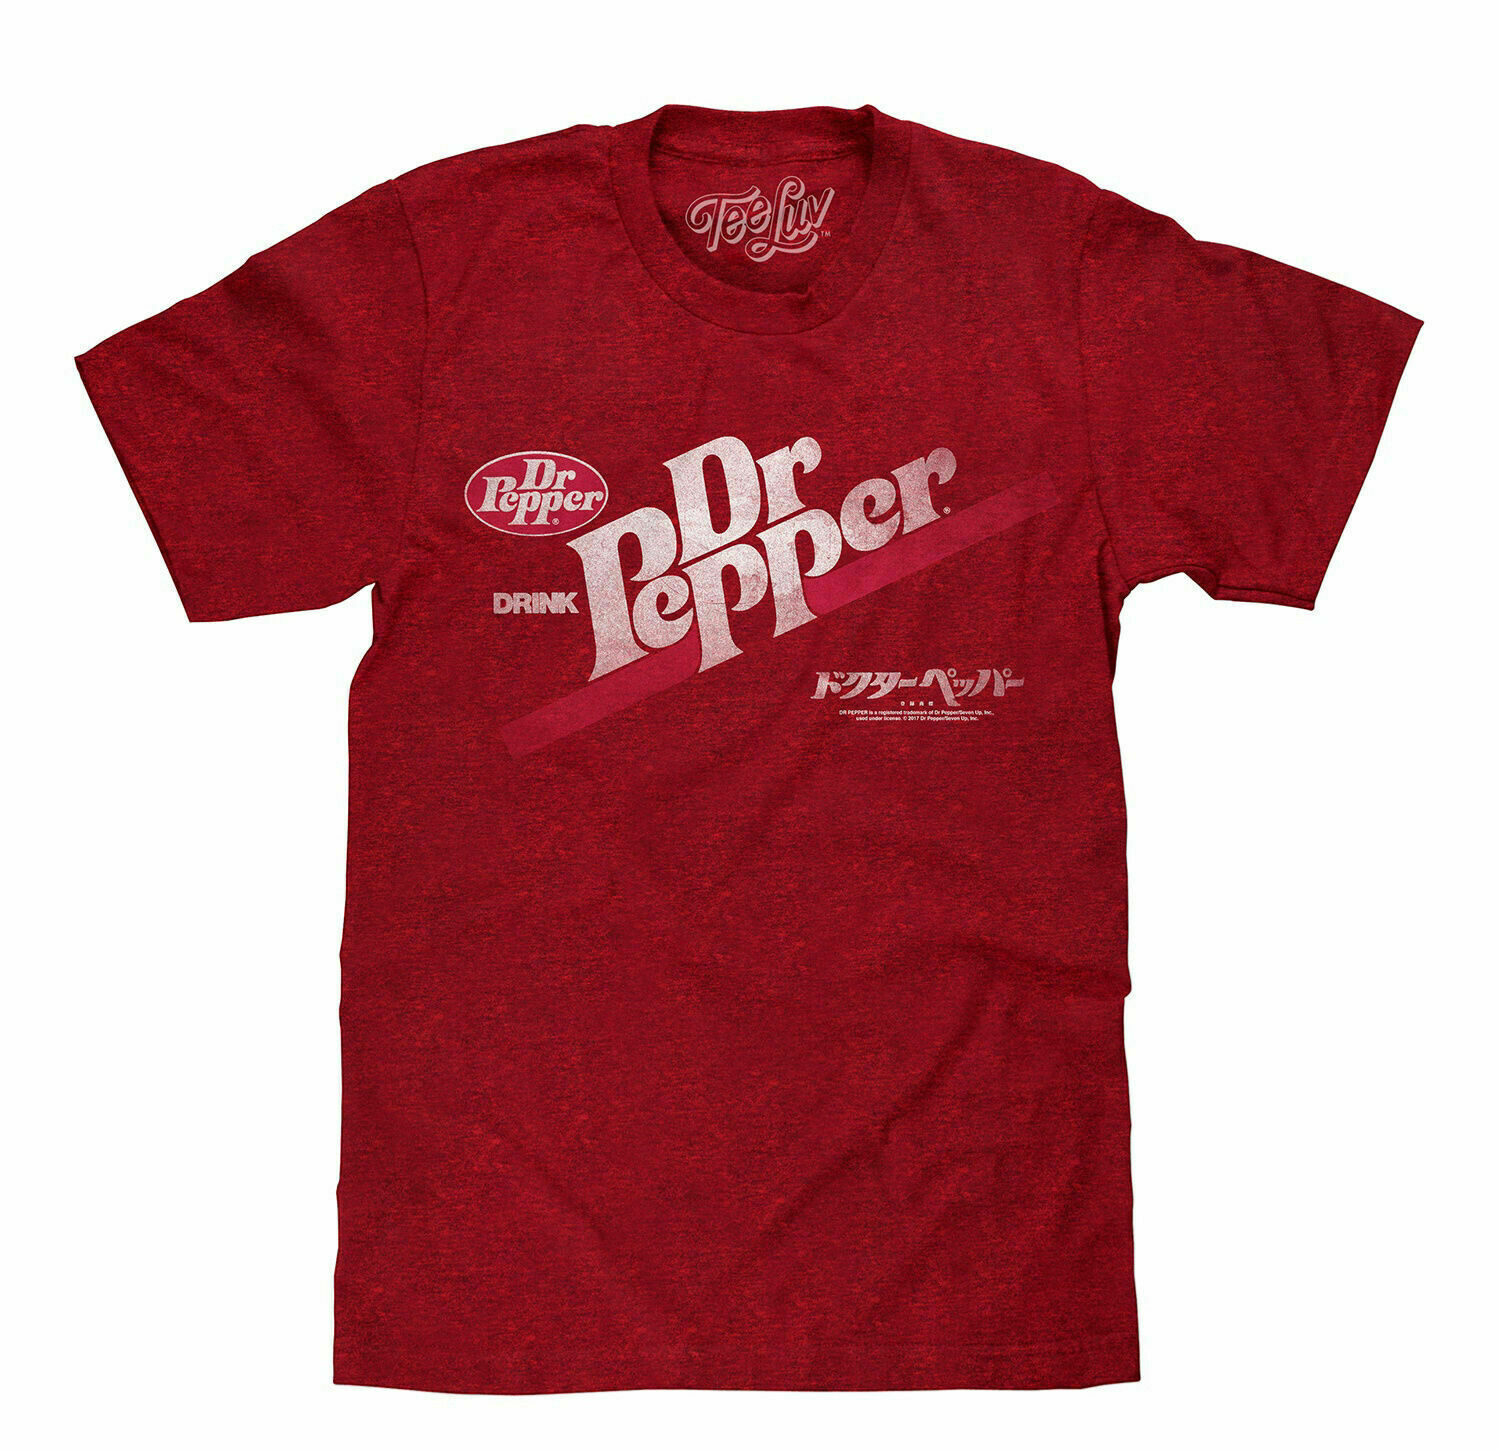 Dr Pepper Shirt Graphic Tee Heather Maroon Cotton Blend Size Large T